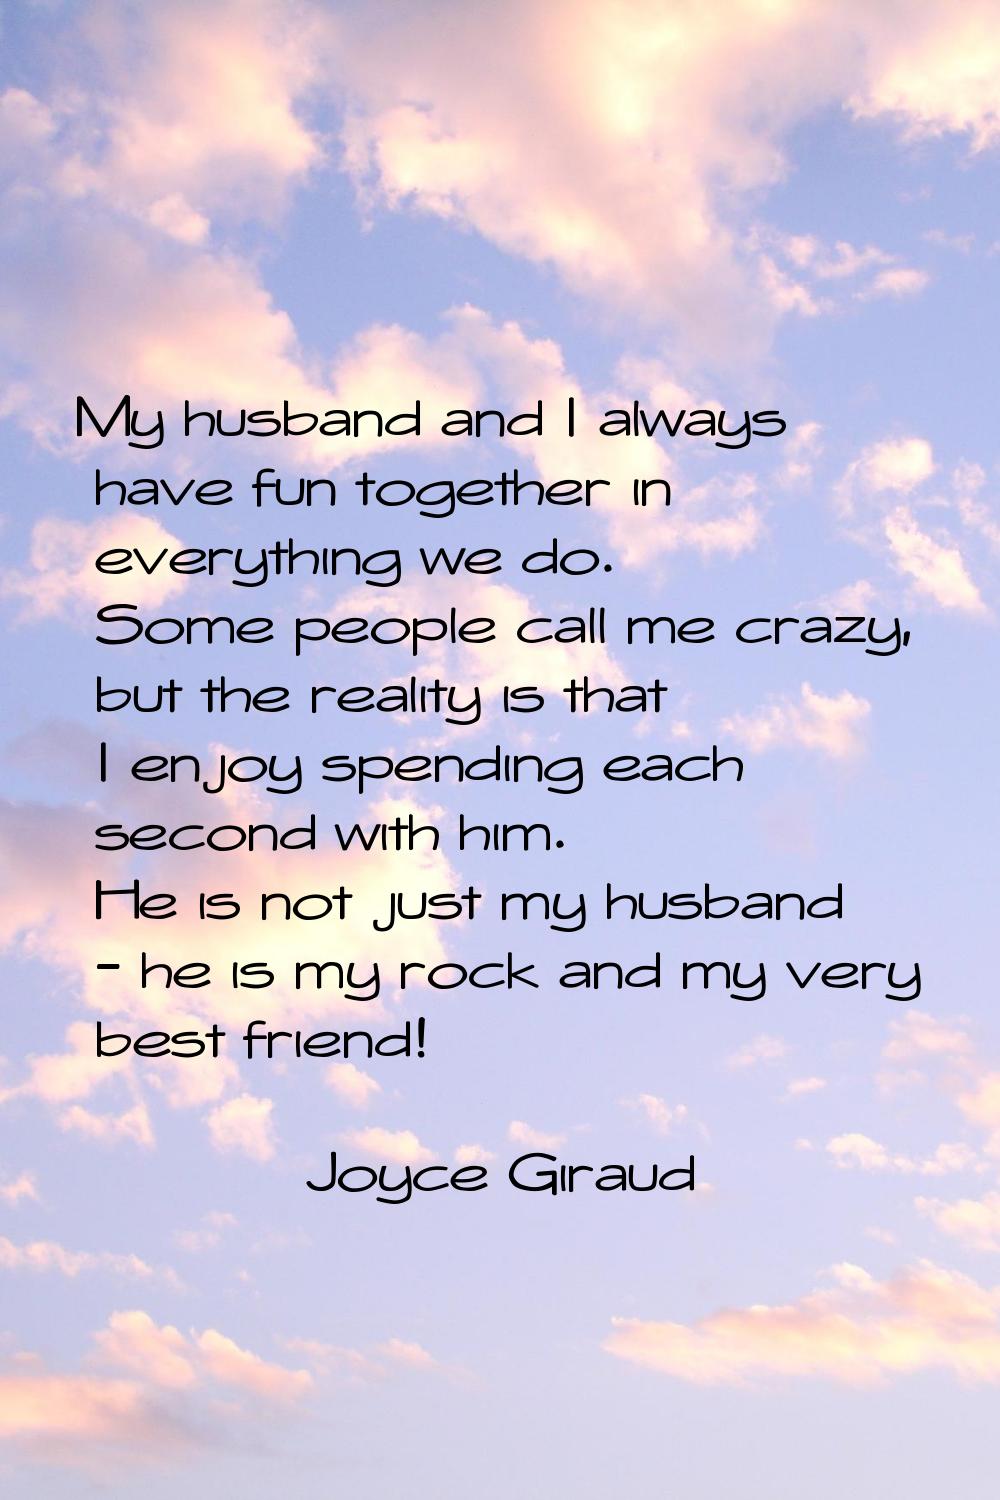 My husband and I always have fun together in everything we do. Some people call me crazy, but the r